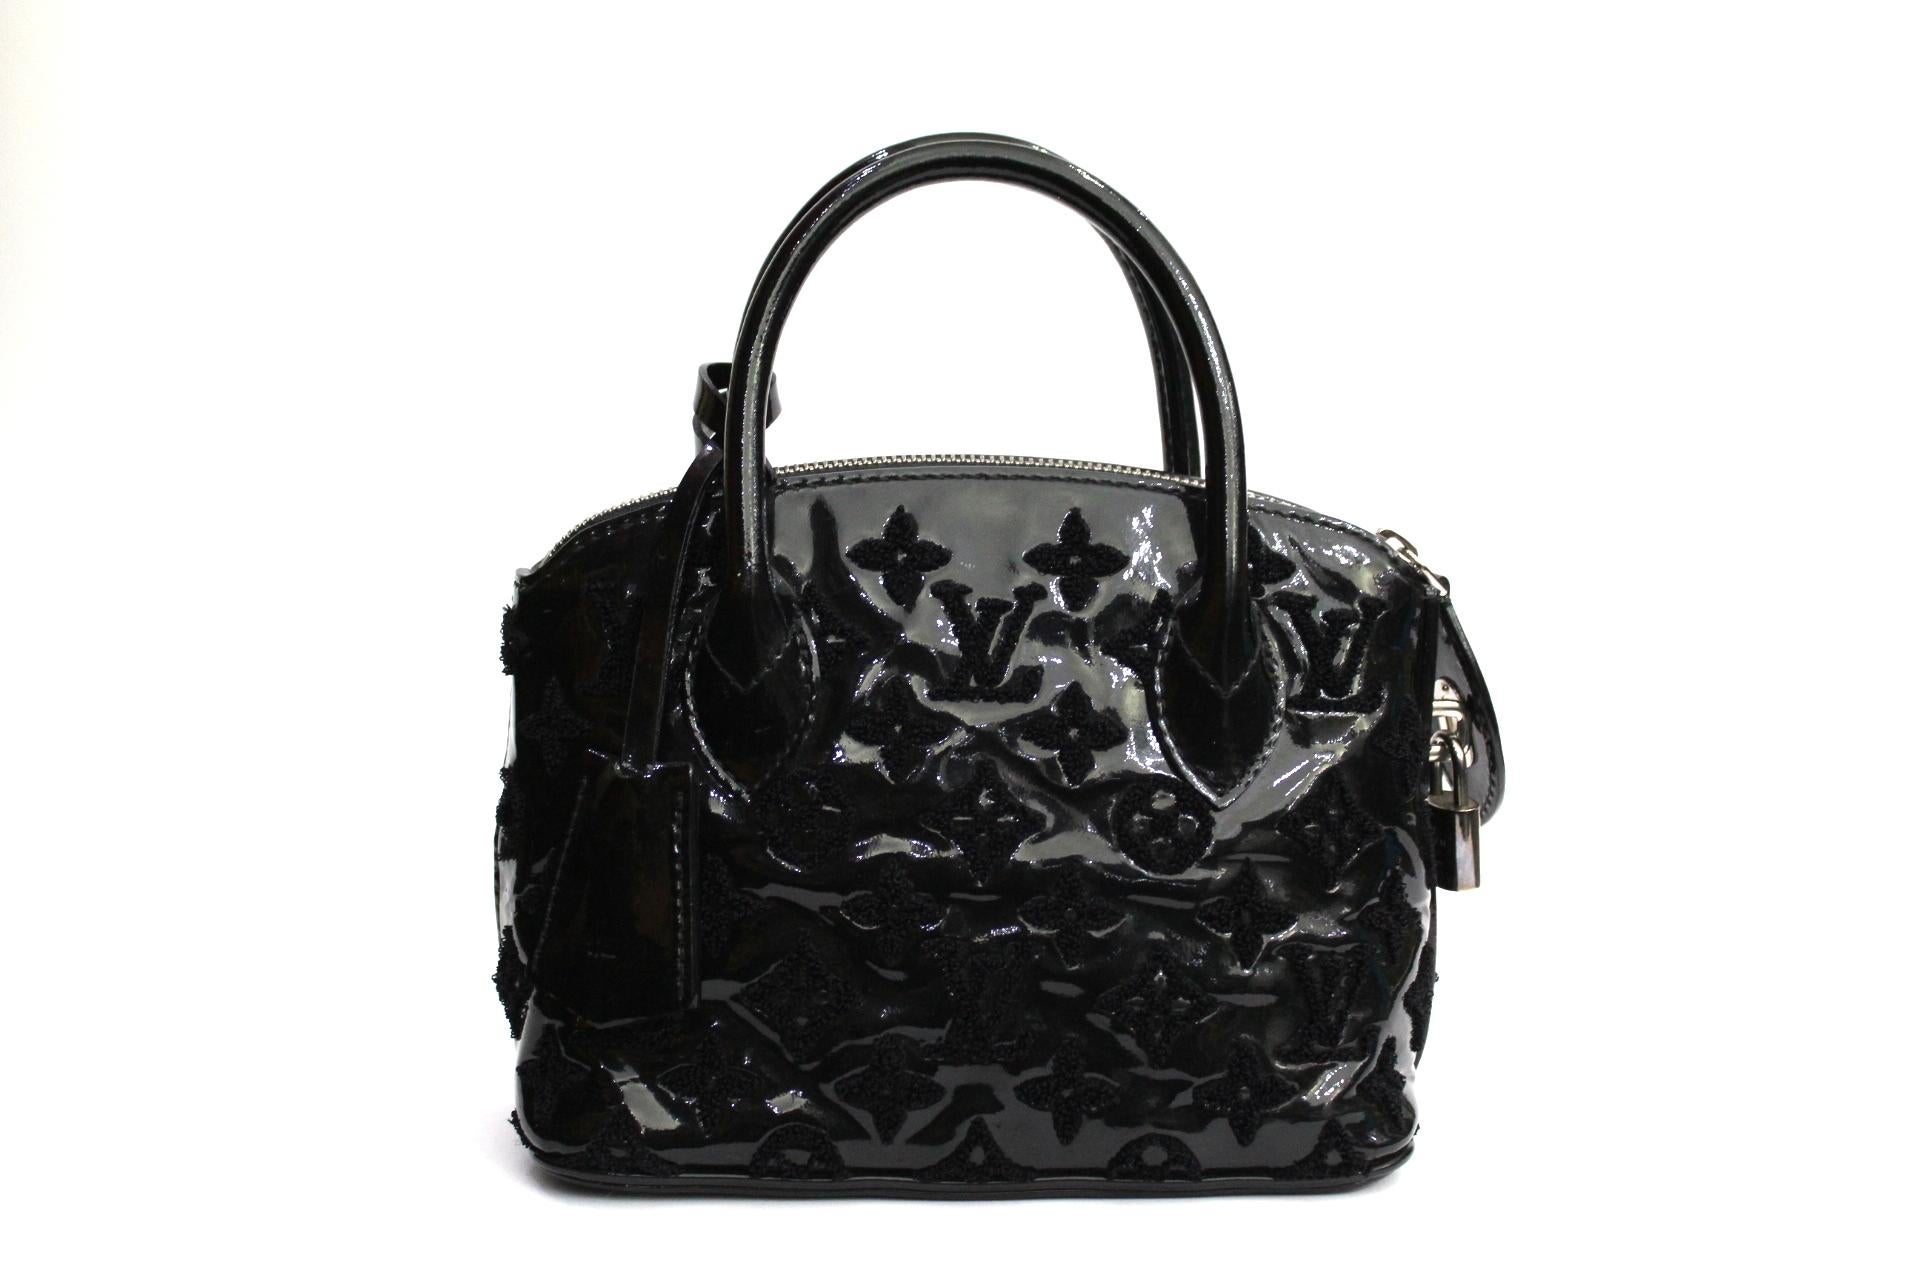 Pretty Louis Vuitton handbag Lockit BB model, LIMITED EDITION!
In patent leather and monogram in jacard canvas, silver hardware.
The class and elegance of this jewel make it a perfect bag for important evenings.
This Vuitton is in excellent